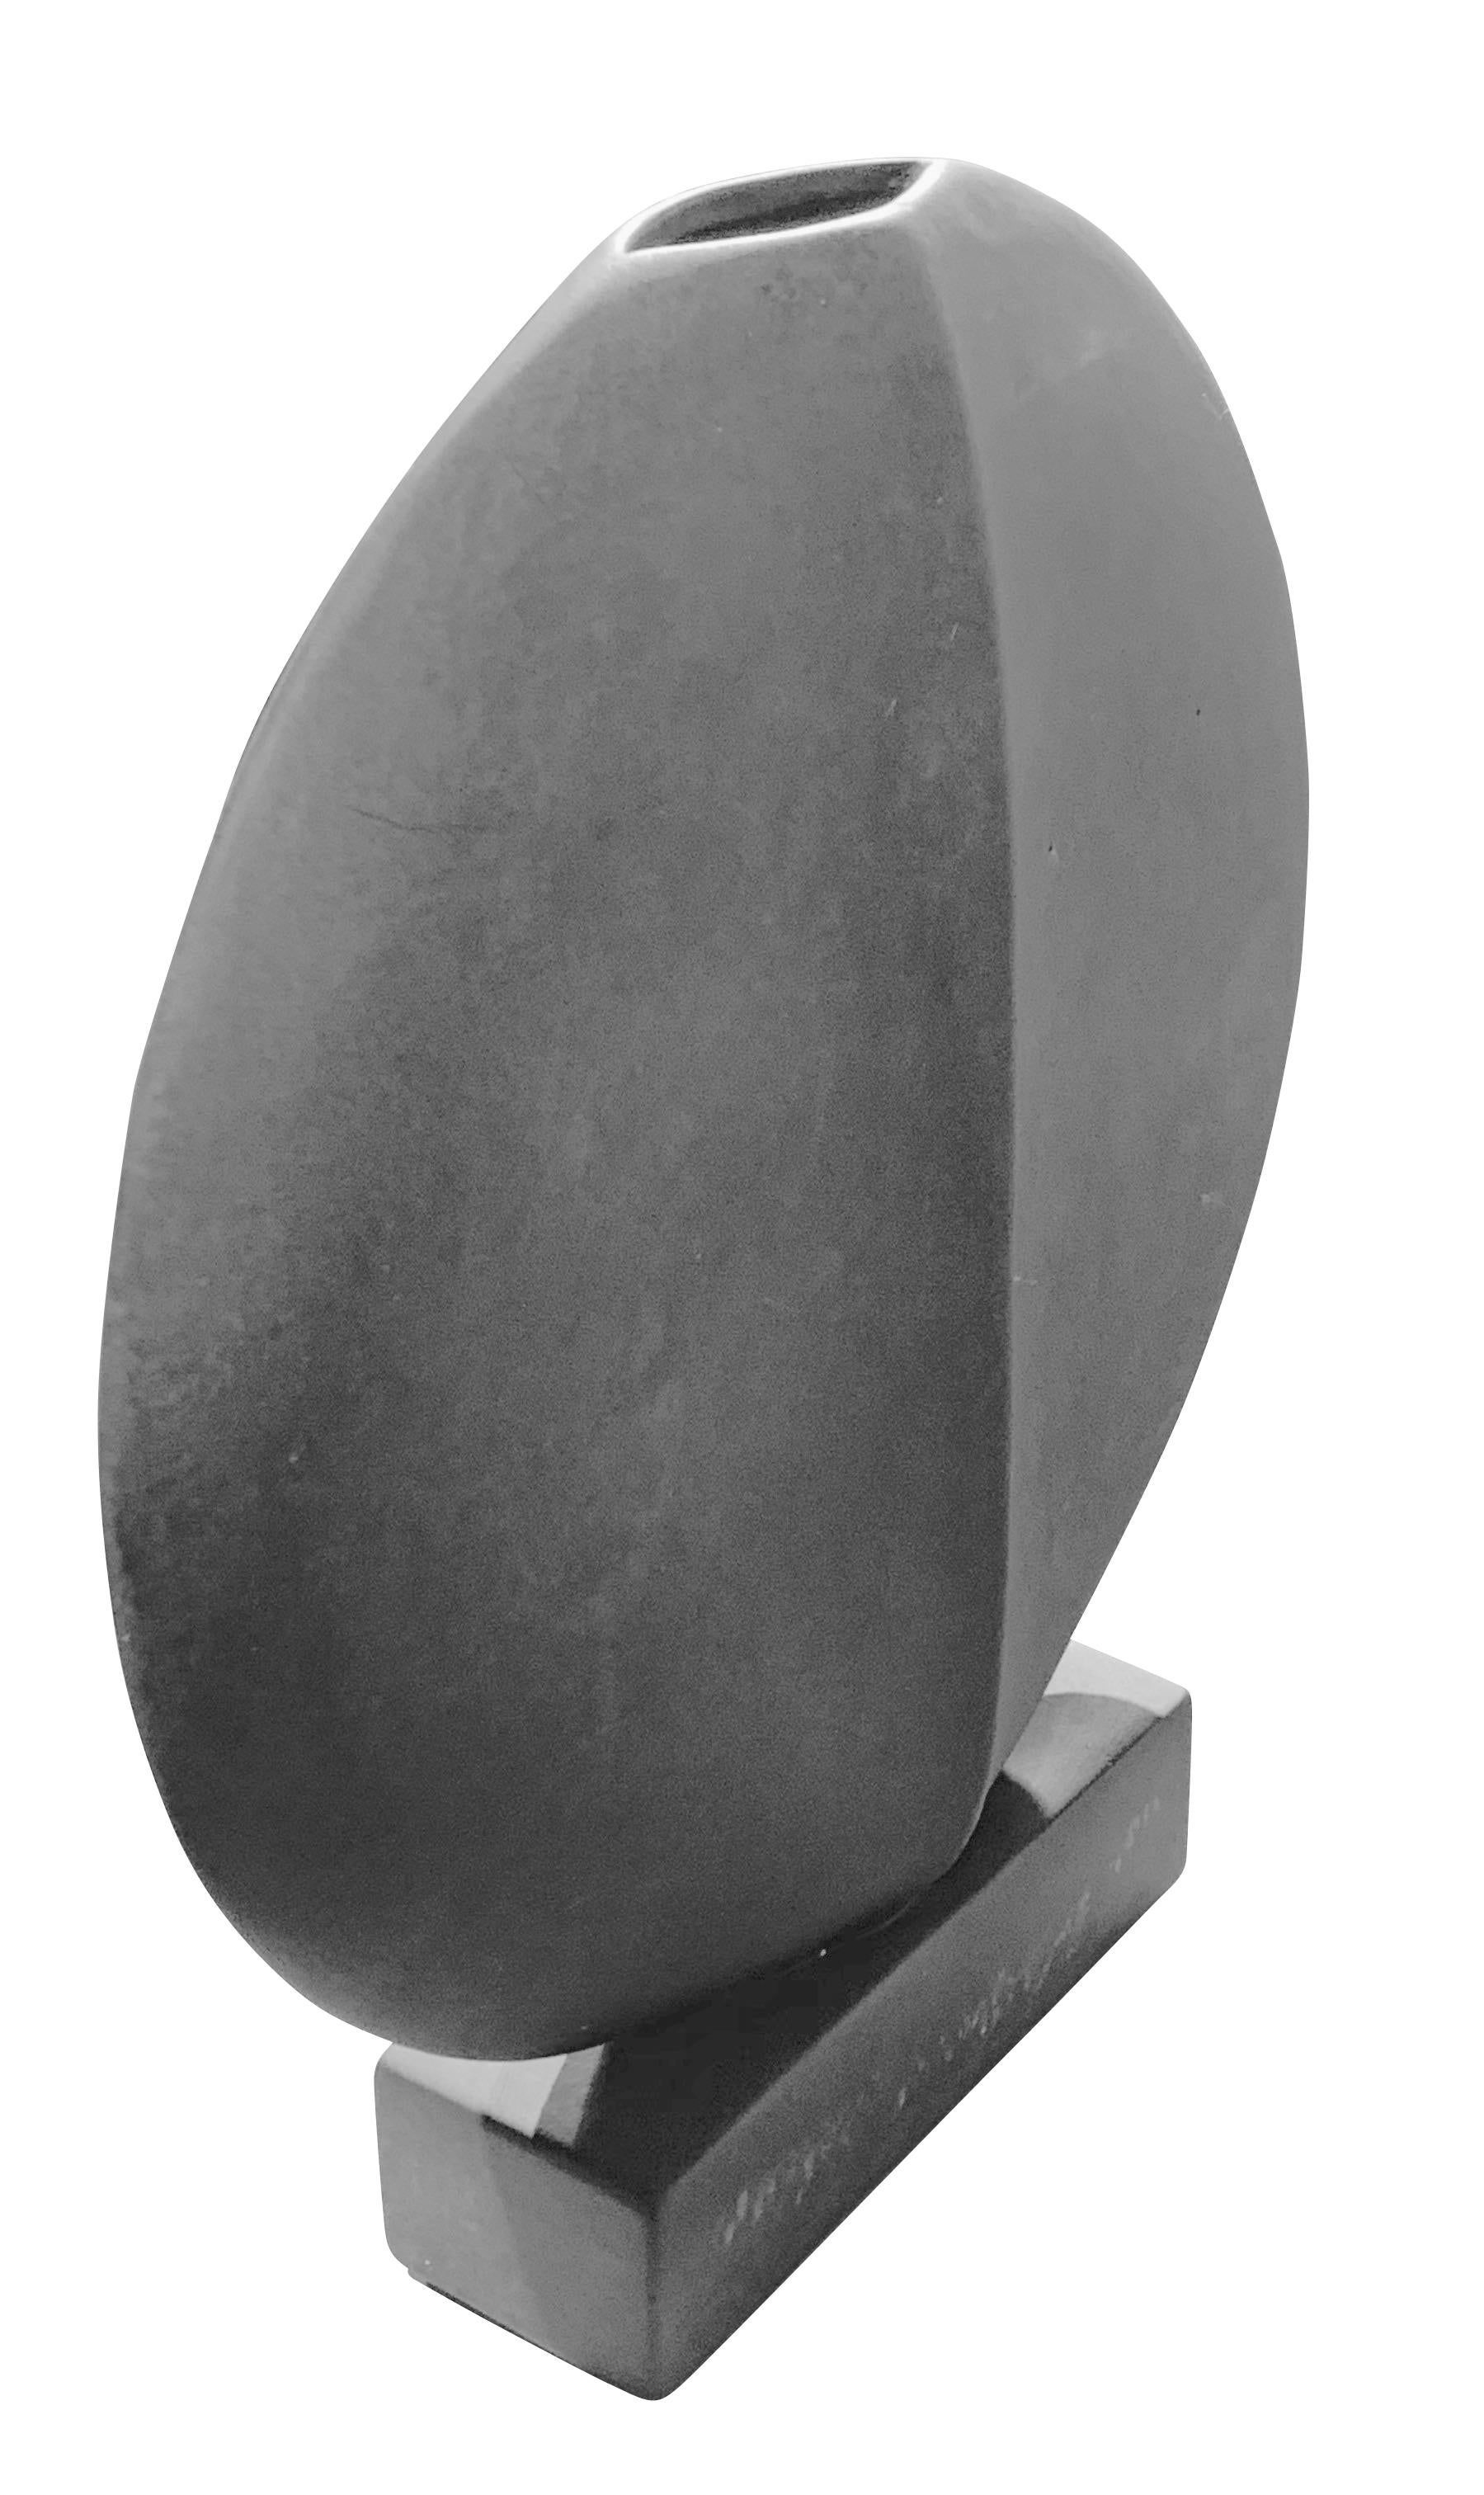 Contemporary Danish design thin round ceramic vase on self stand.
Decorative center seam.
Matte grey glaze.
One of a collection of many shapes and sizes.

   
  